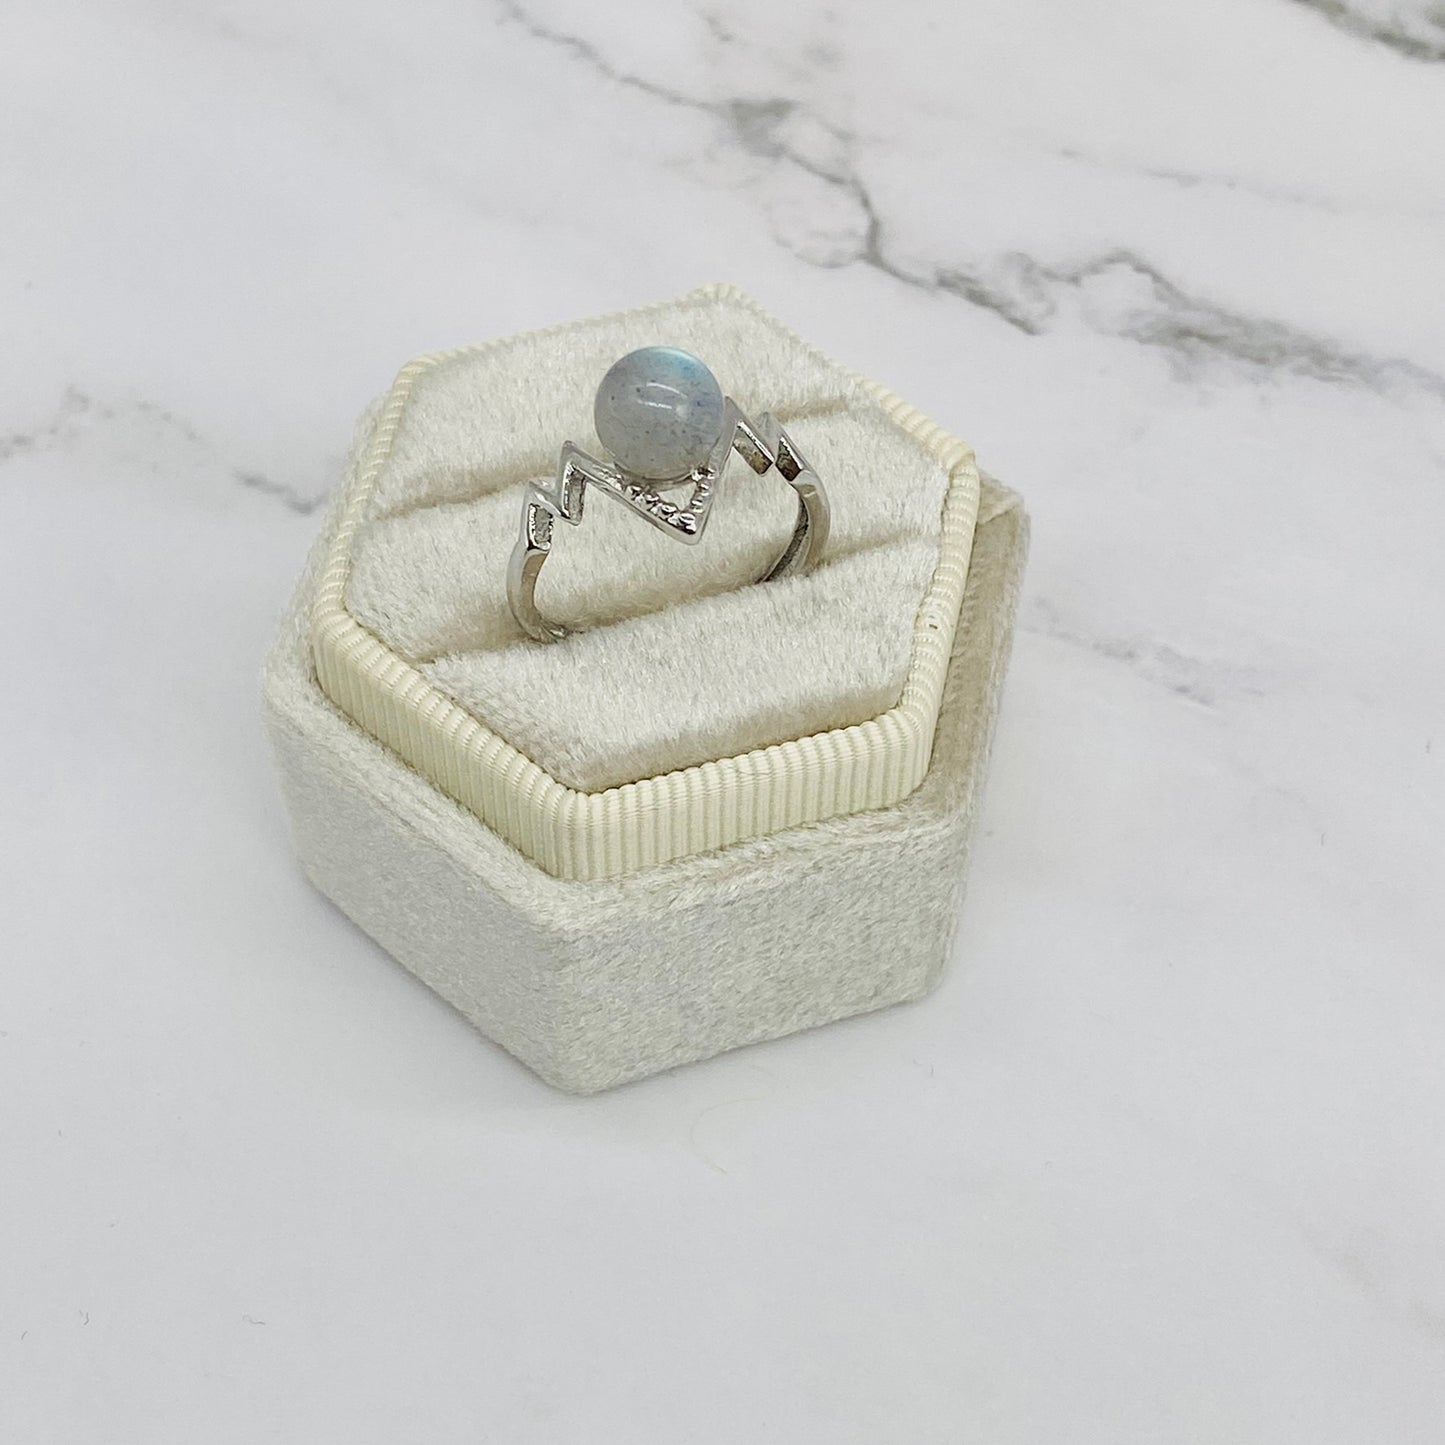 Labradorite Crystal Ring, Handmade Jewelry, Moon Shaped Rings, Cute Rings, Stackable Rings, Adjustable Ring, Gift For Her, Gift Under 20